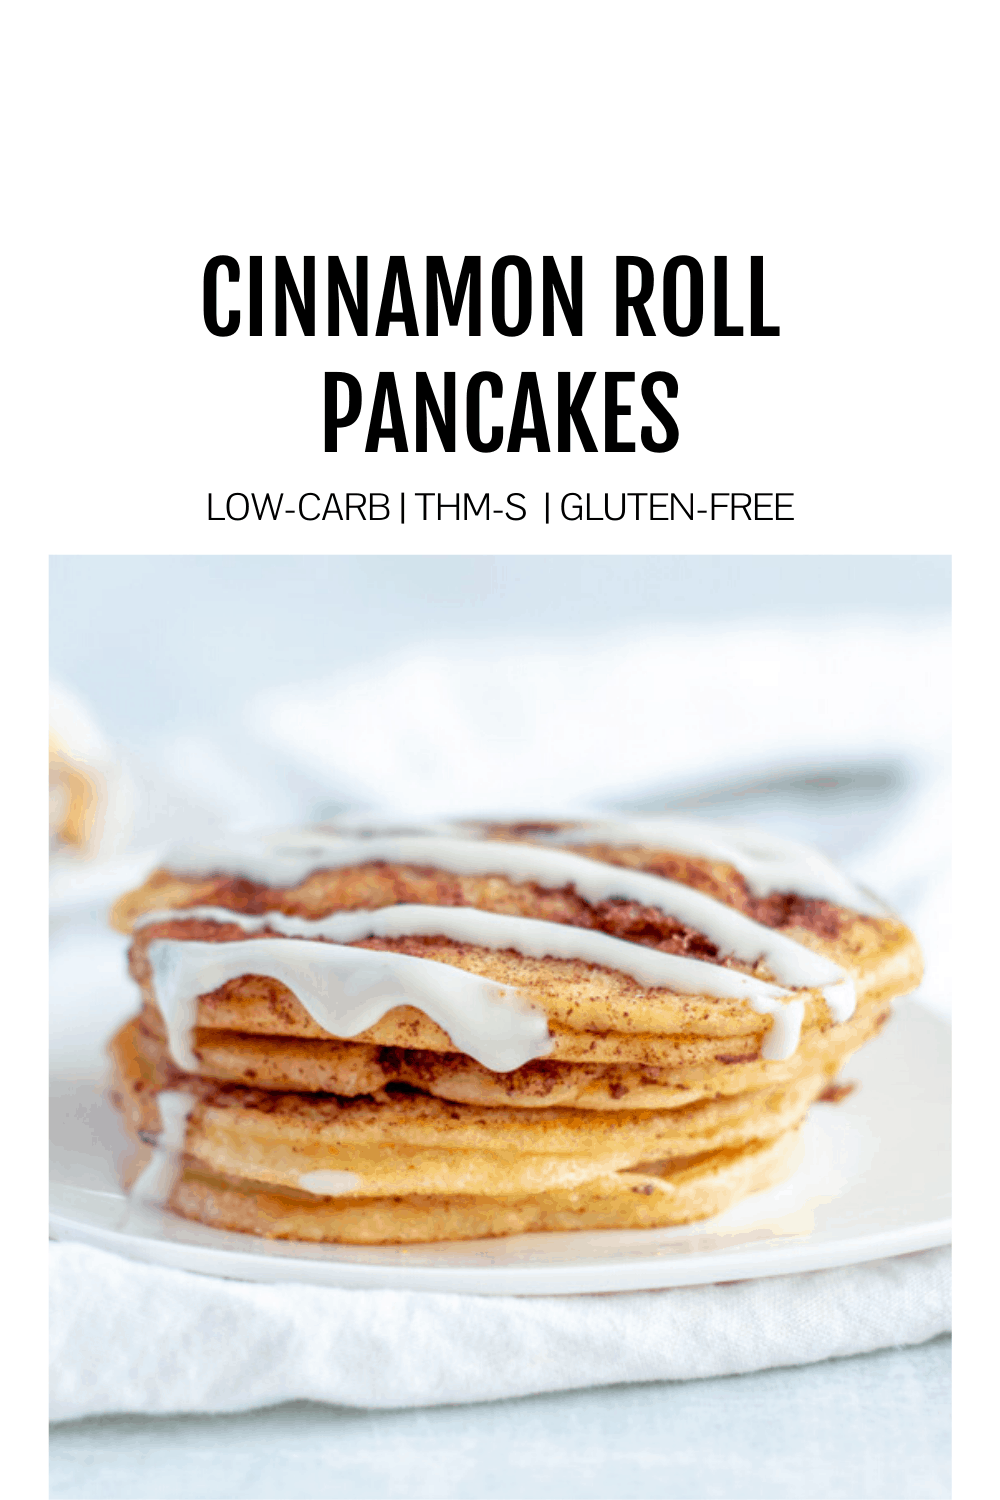 Image of low carb cinnamon roll pancakes with title